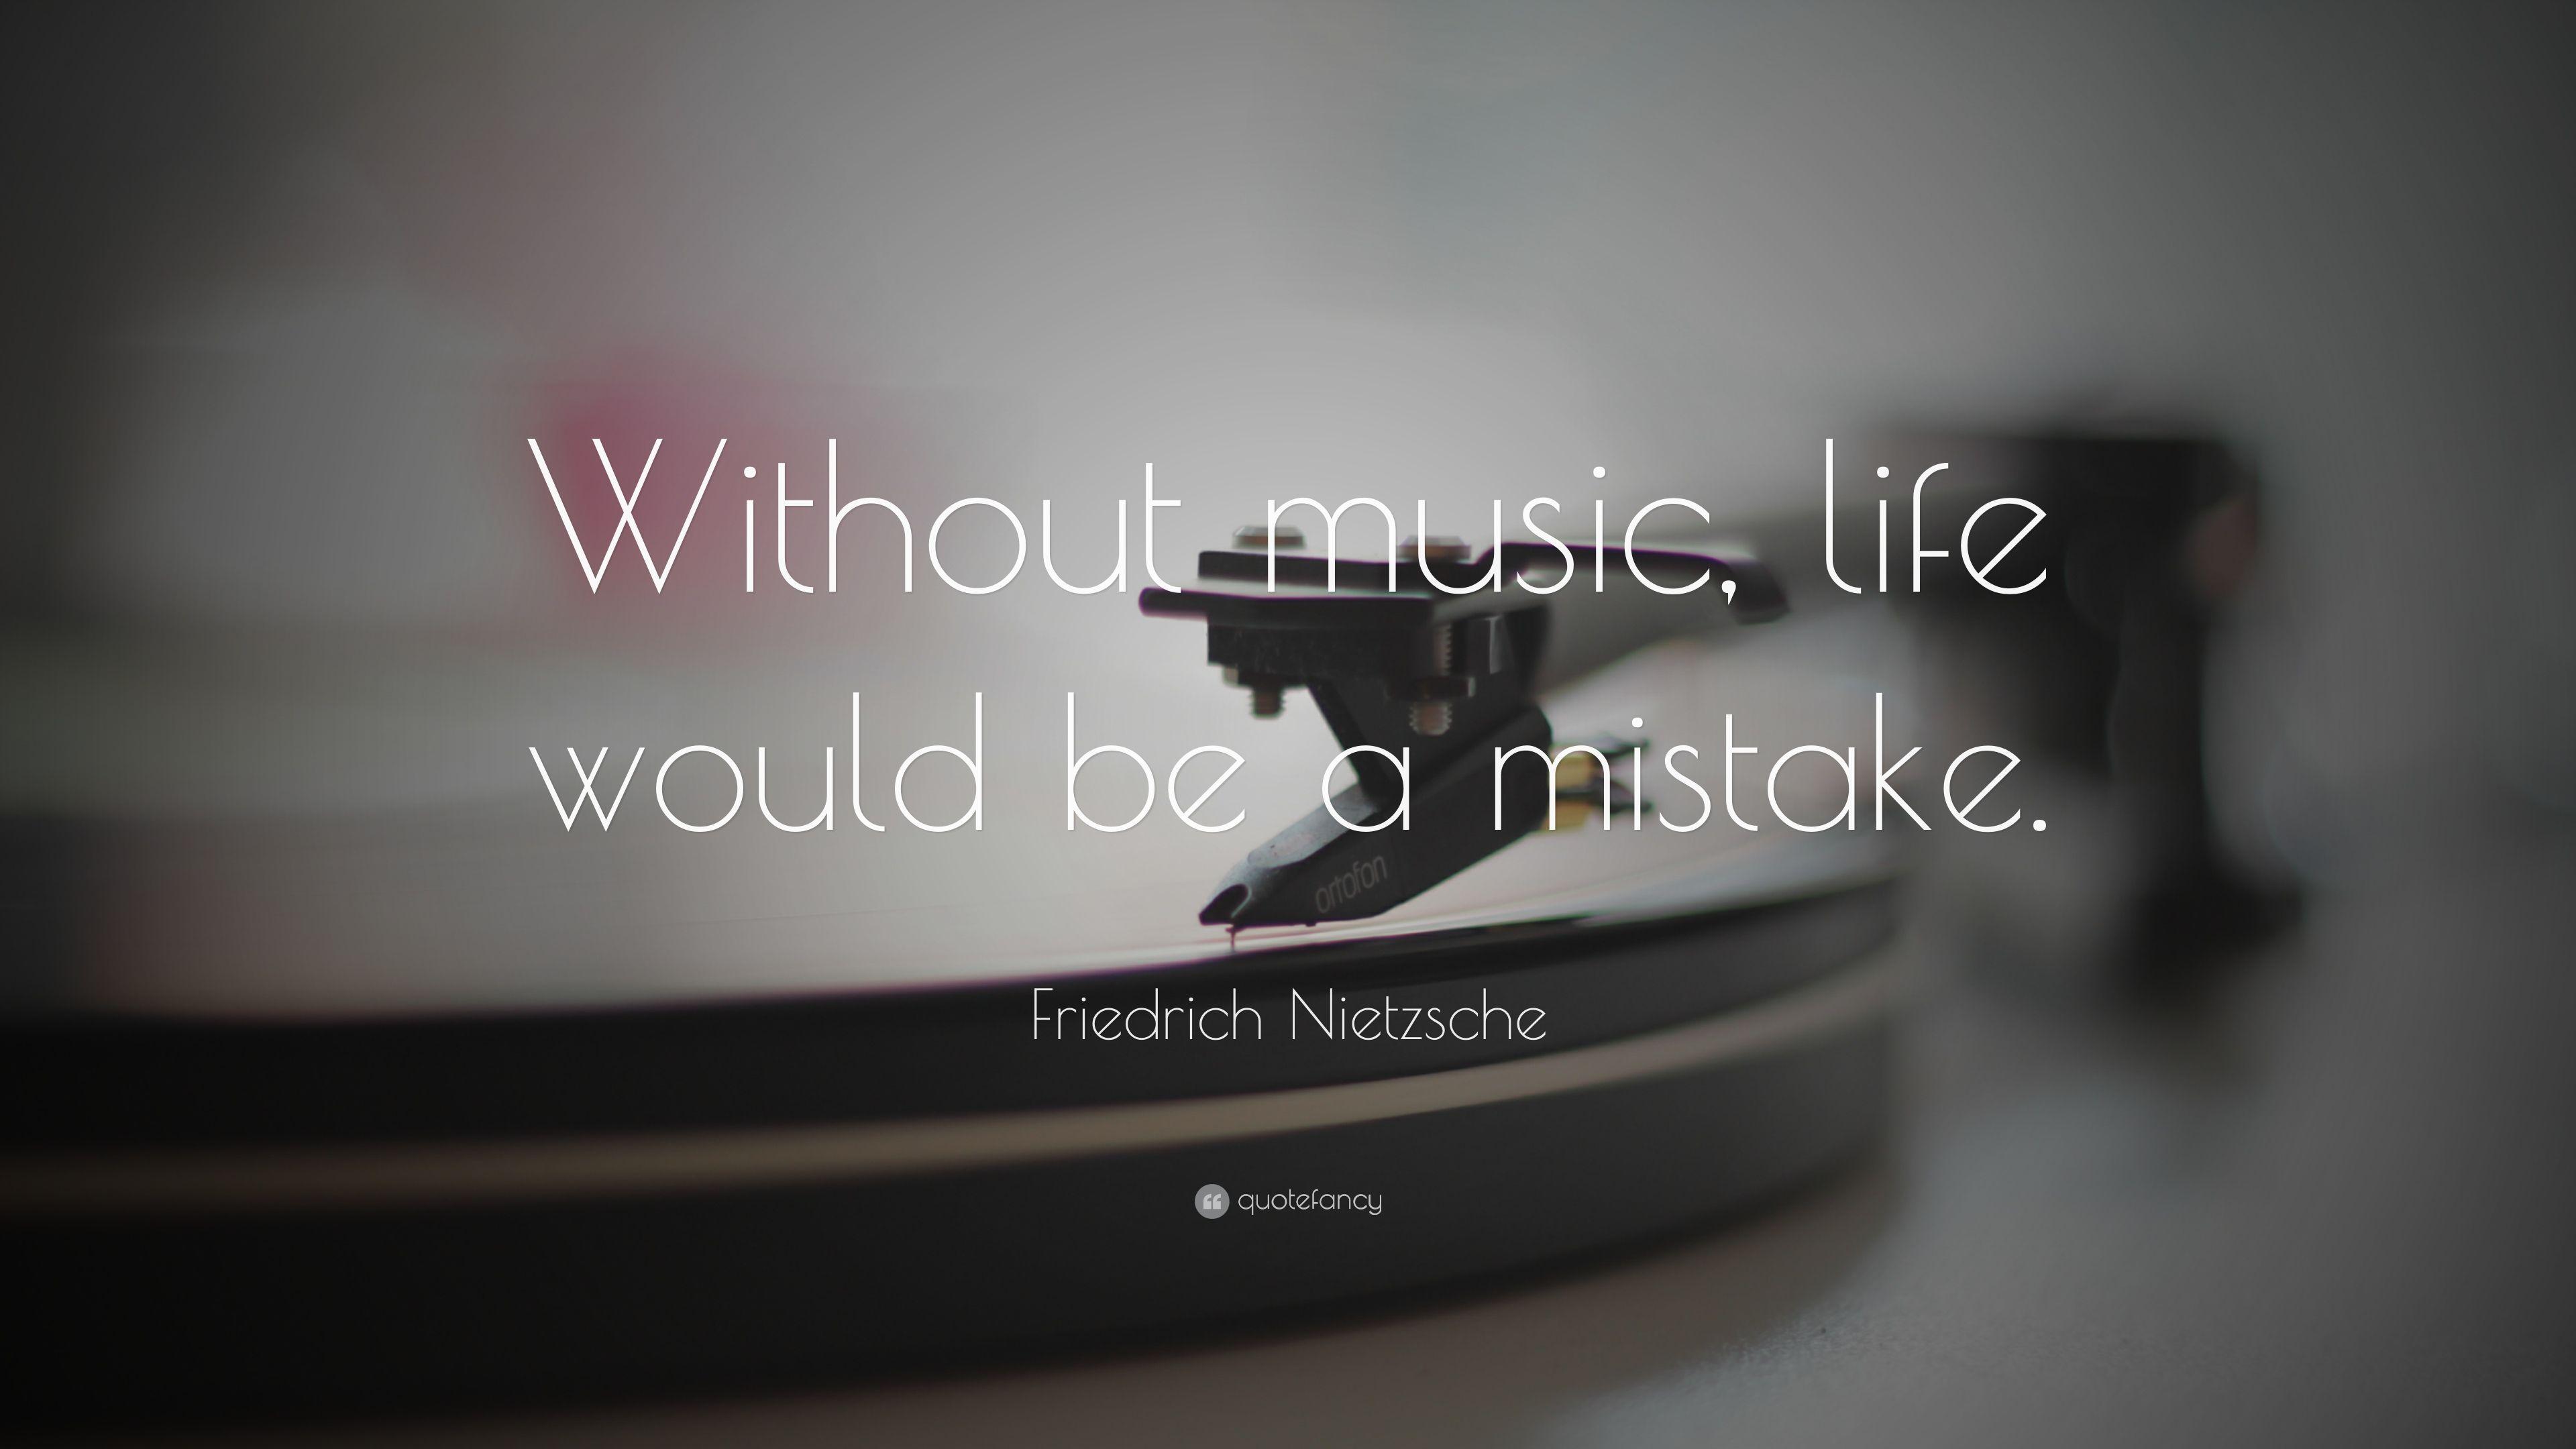 Friedrich Nietzsche Quote: “Without music, life would be a mistake